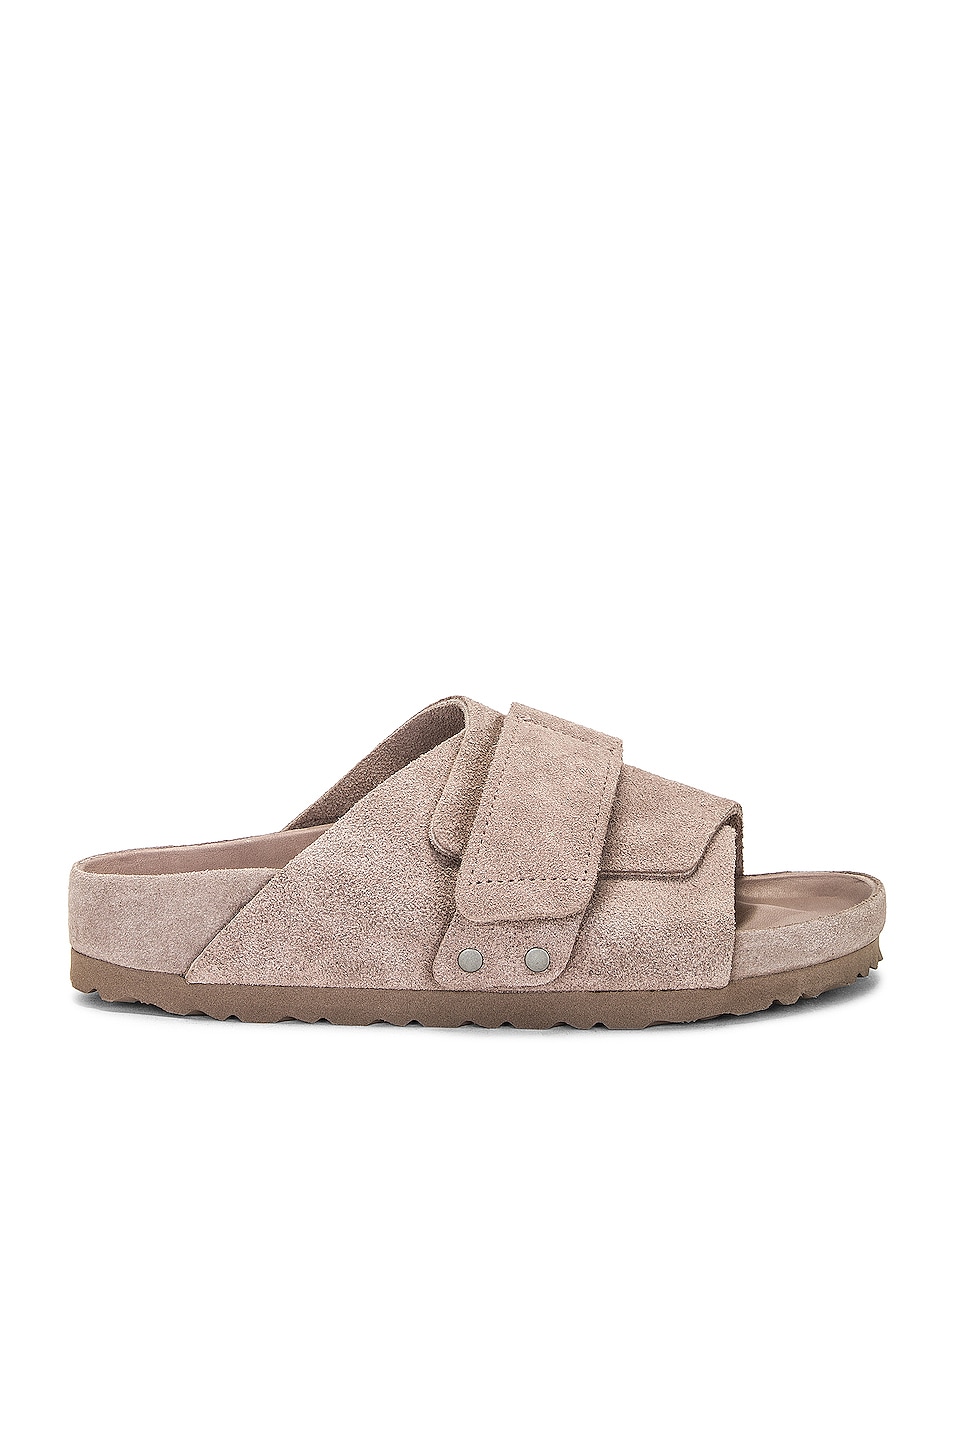 Image 1 of BIRKENSTOCK Kyoto Exquisite Sandal in Gray Taupe